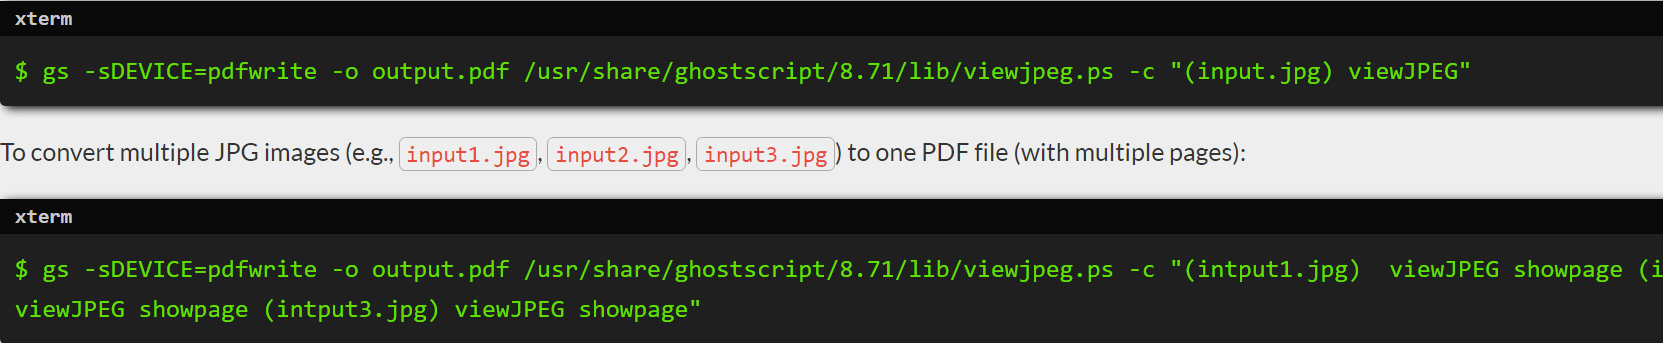 Then, go running the gs command to transform a JPG image to PDF format as mentioned below-